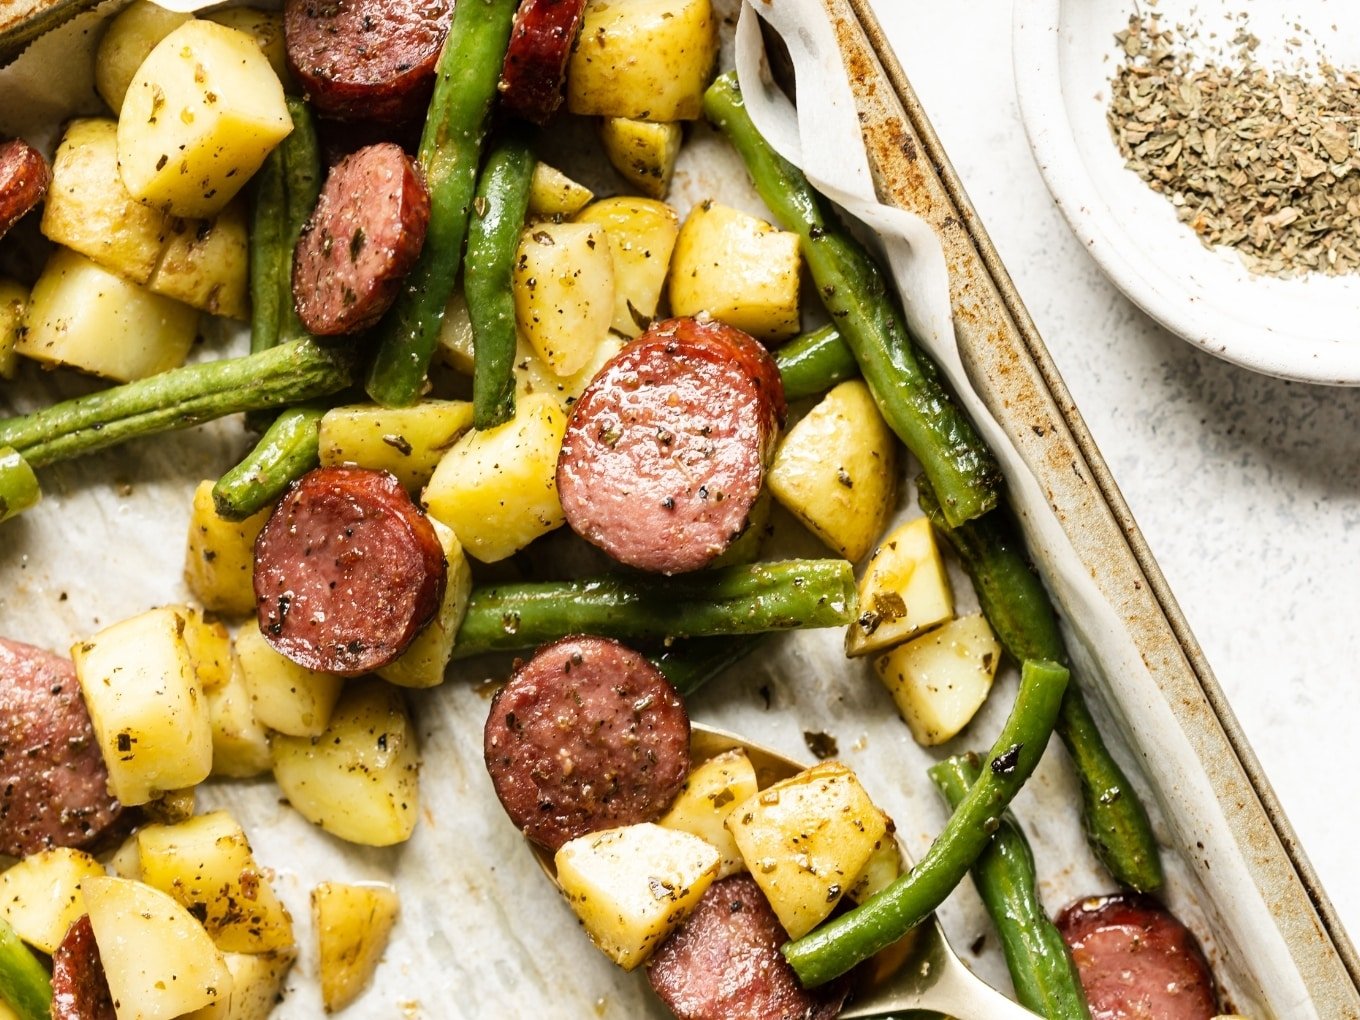 https://thewholecook.com/wp-content/uploads/2021/04/Sausage-with-Potatoes-Green-Beans-by-The-Whole-Cook-horizontal-1.jpg